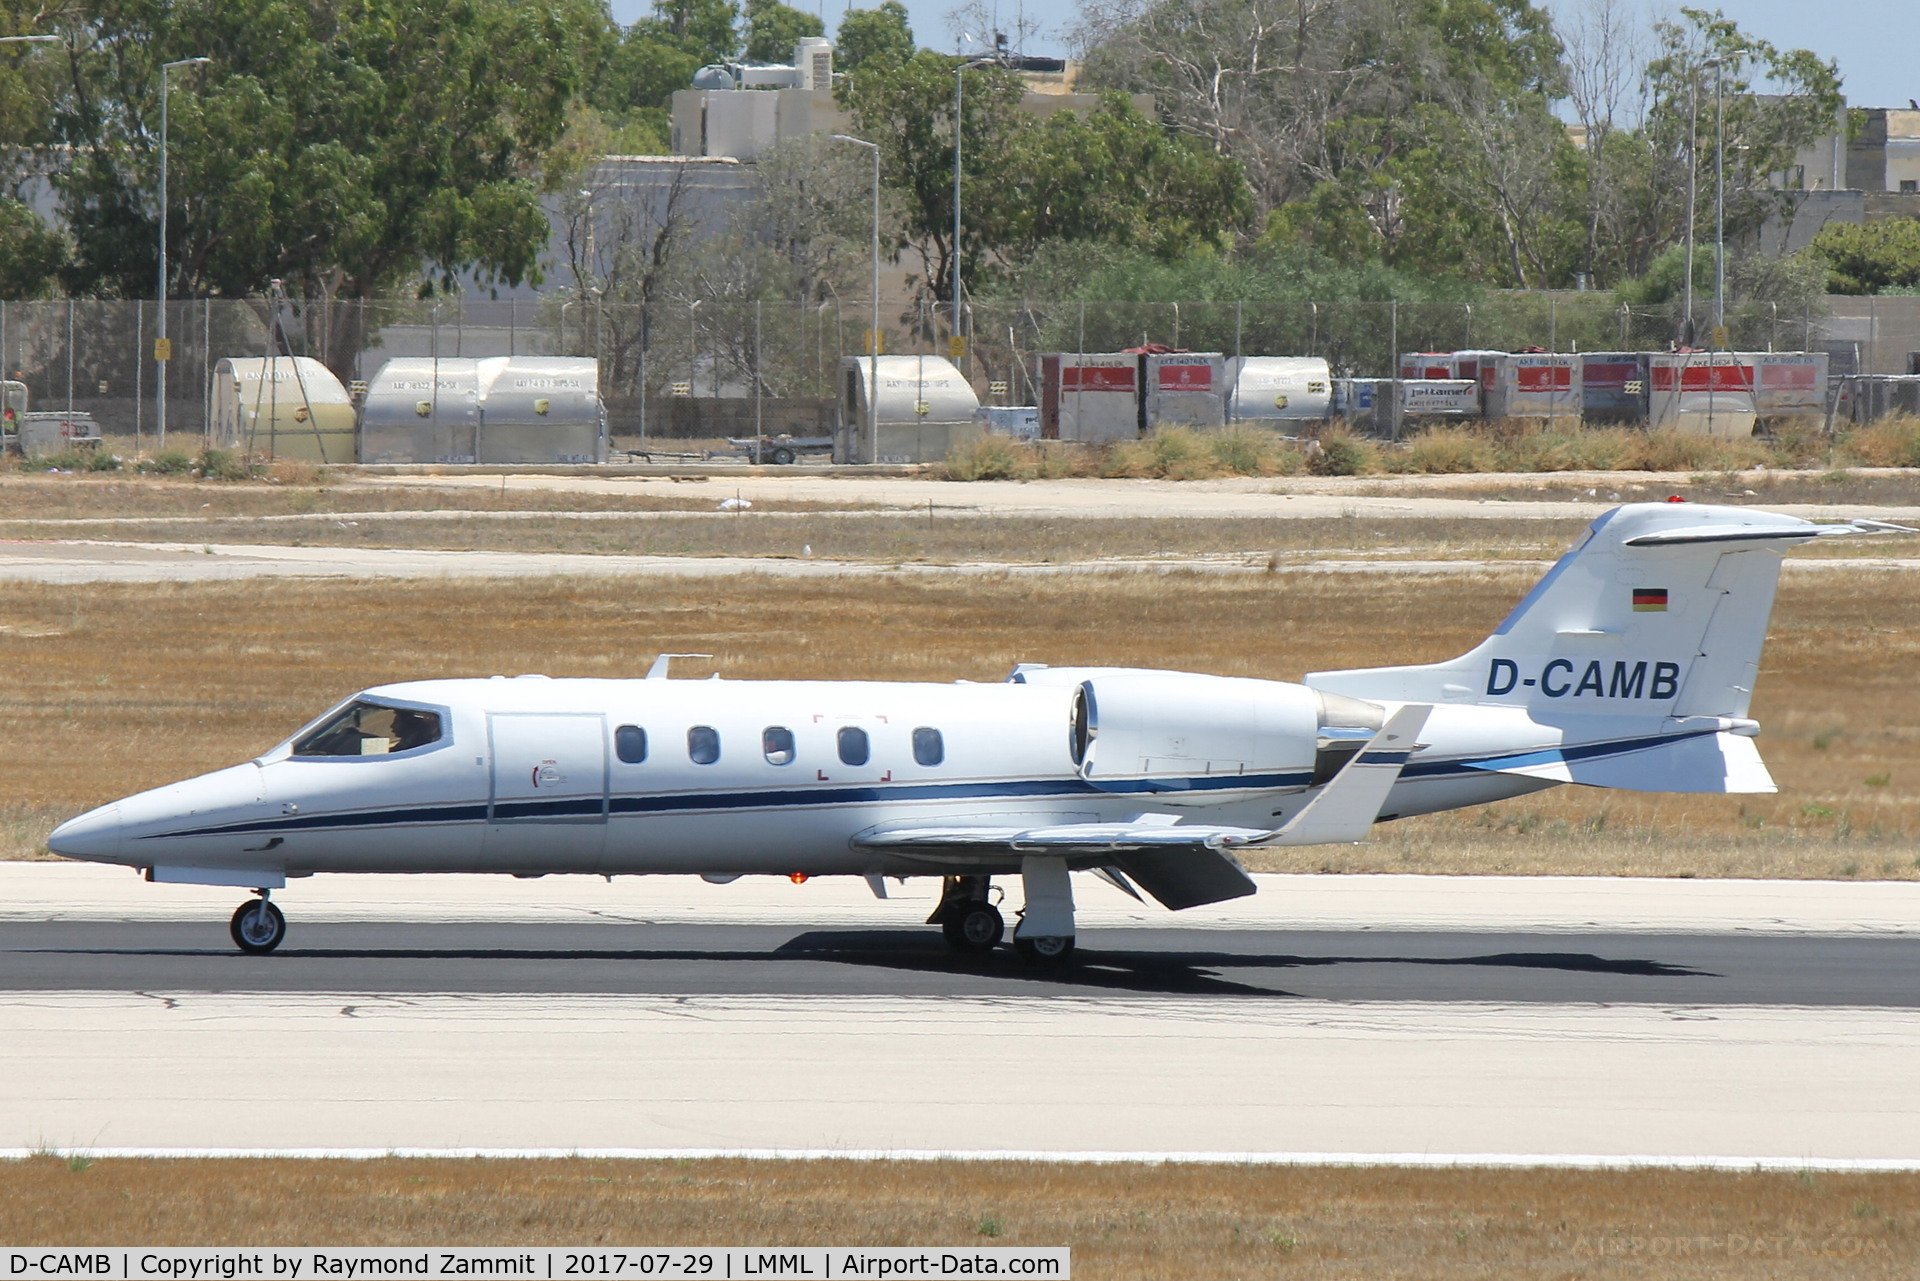 D-CAMB, 1978 Gates Learjet 35A C/N 35-174, Gates Learjet D-CAMB Private jet